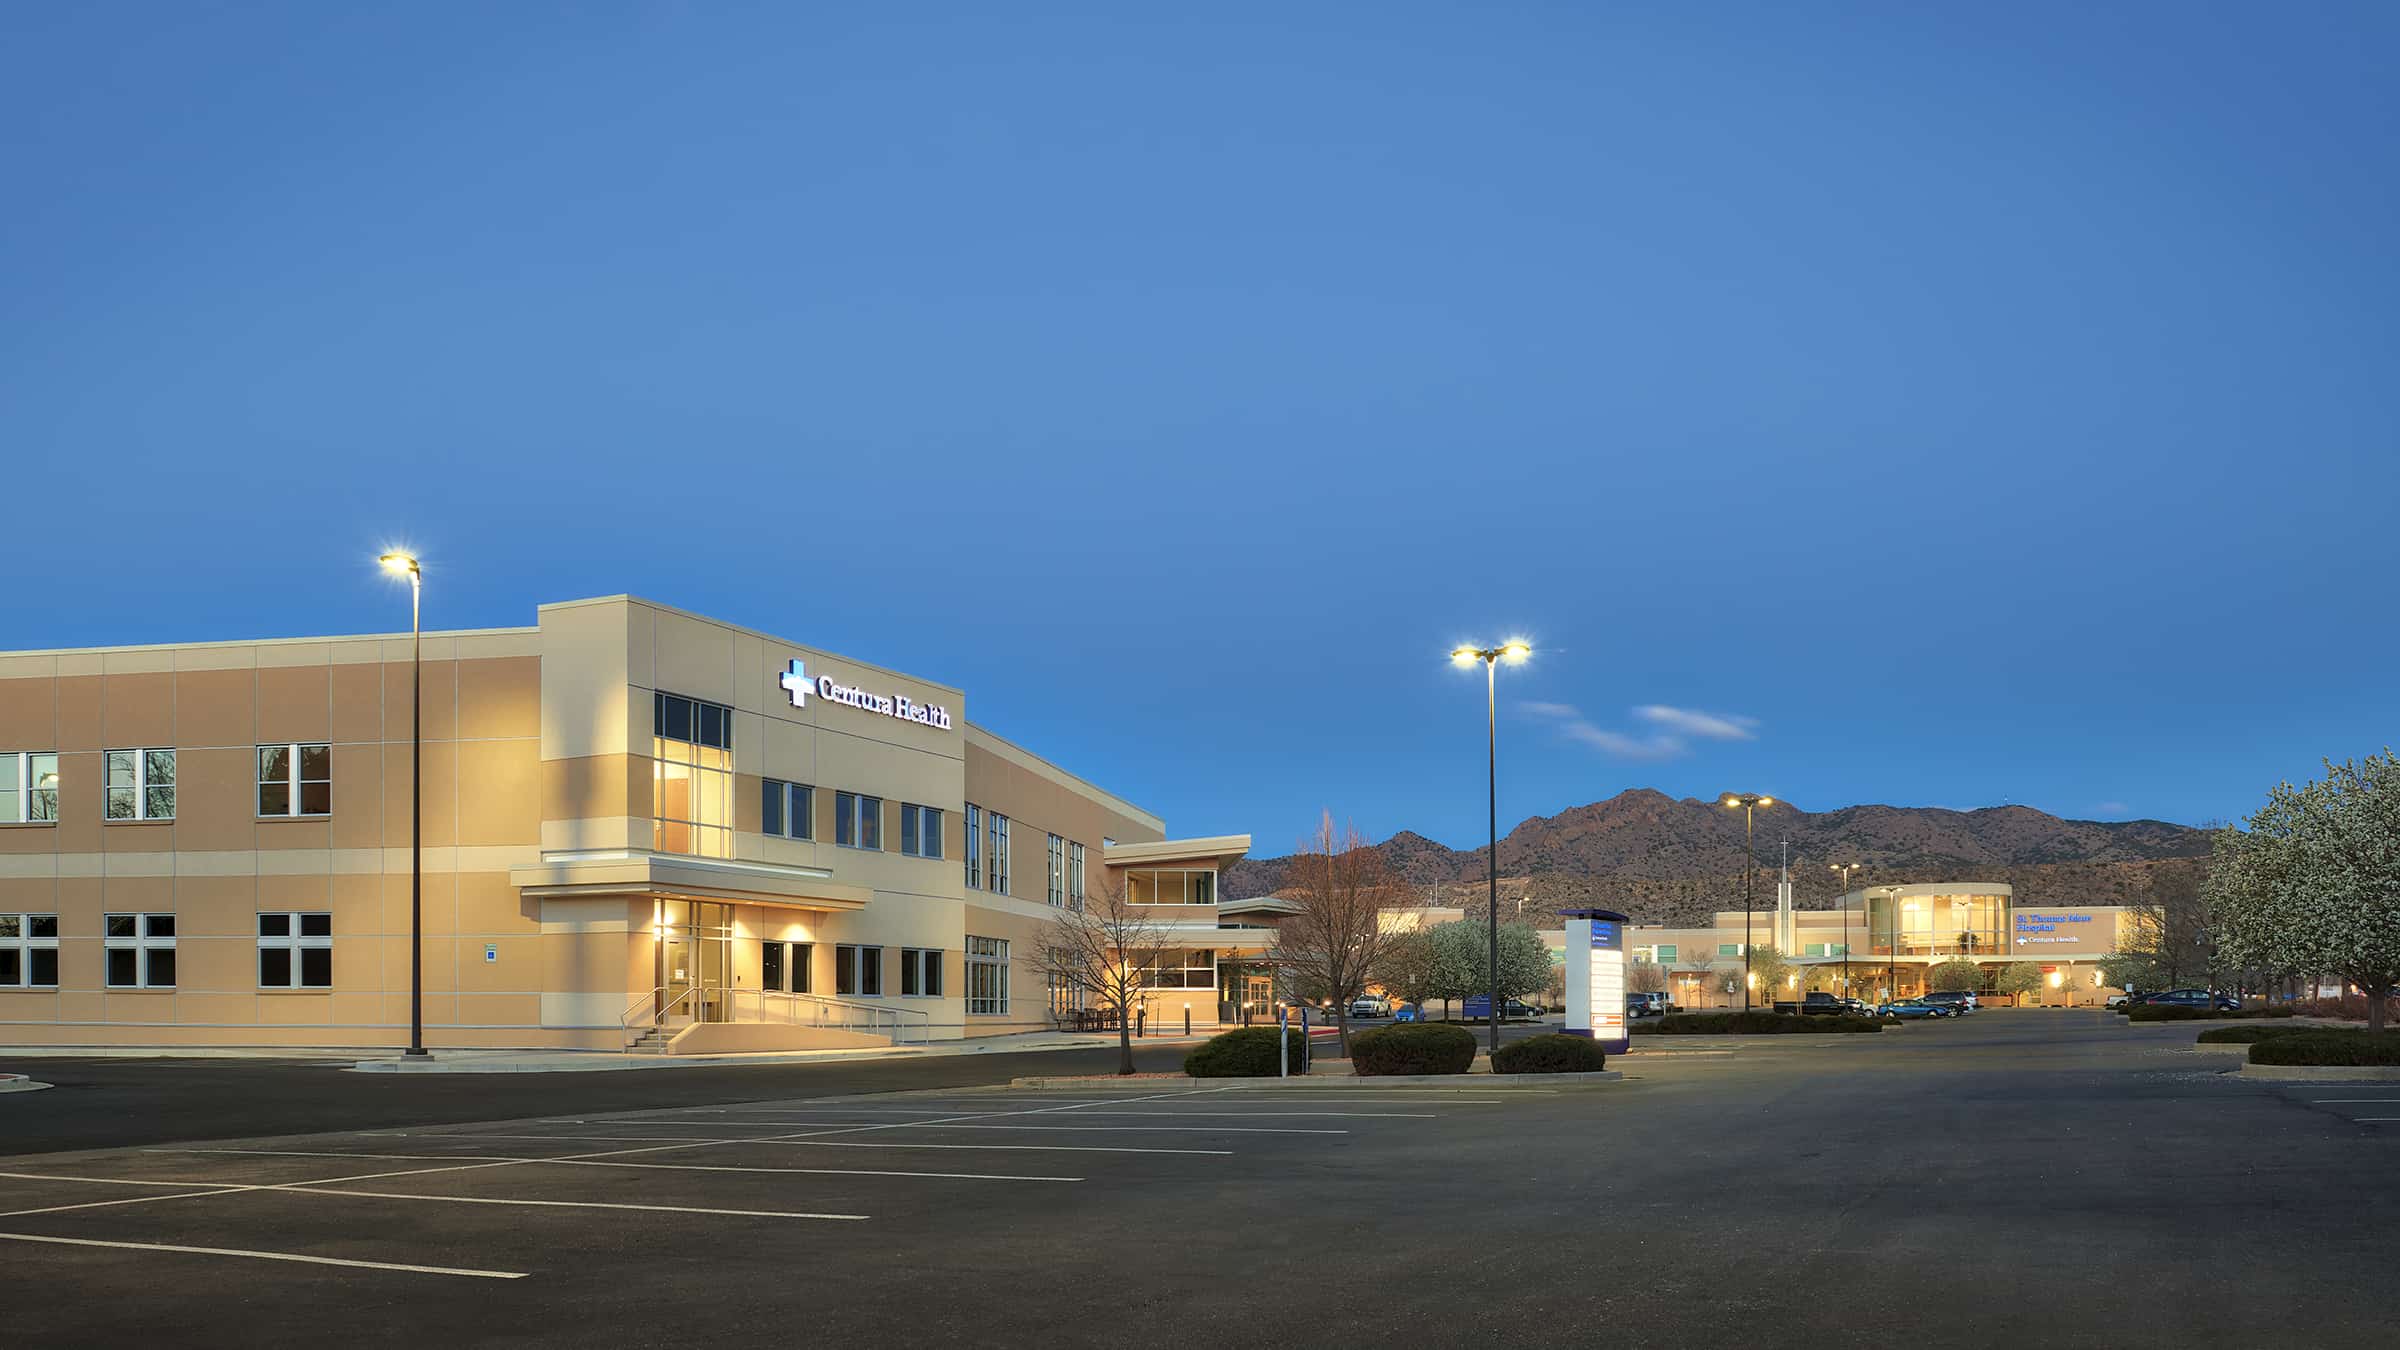 Centura Health - St. Thomas More Medical Office Building Building Exterior at Dusk